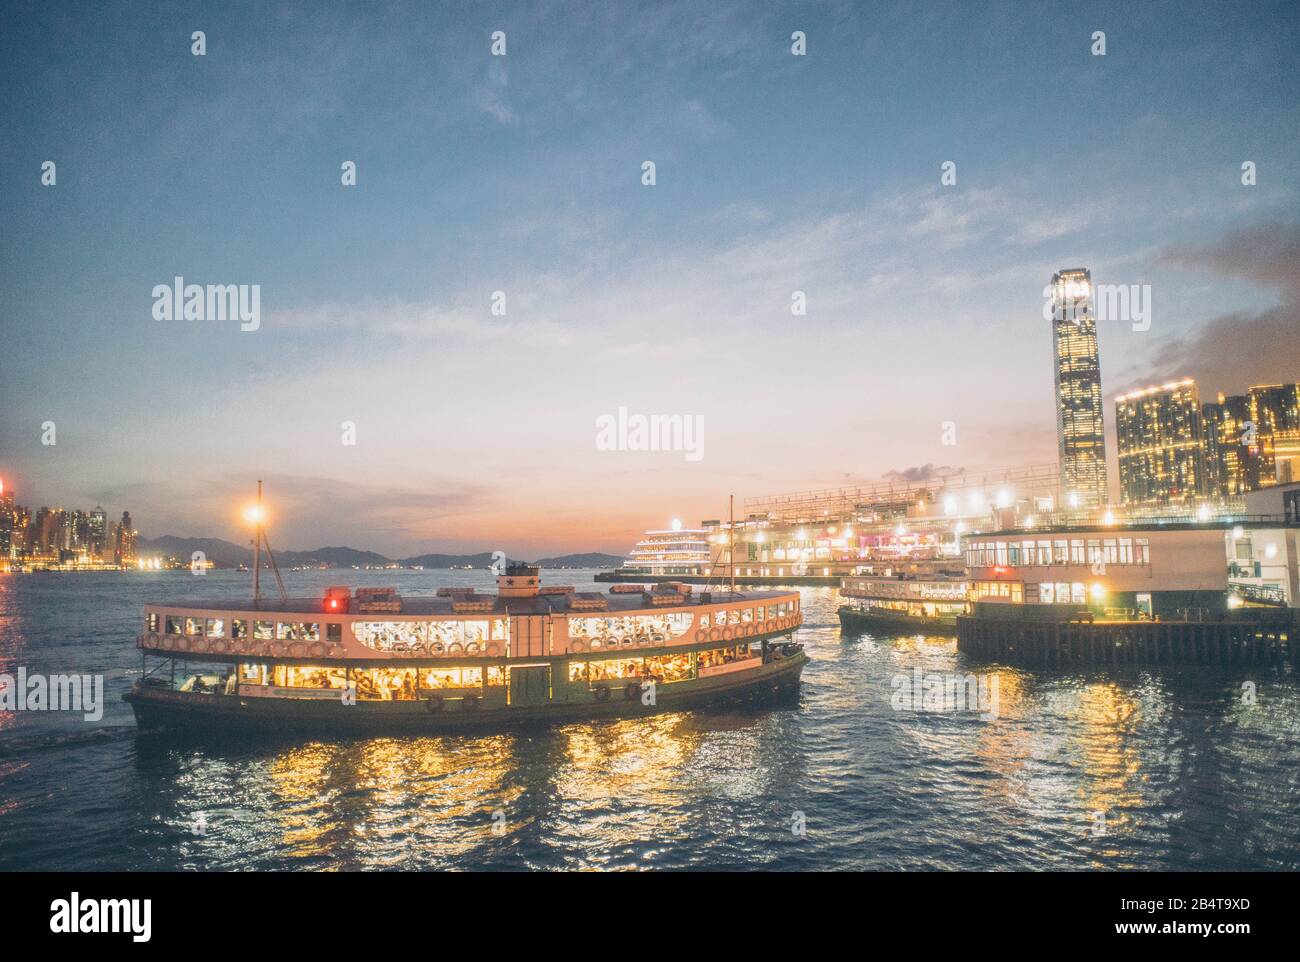 Star ferry cruising in Victoria harbour of Hong Kong. Stock Photo